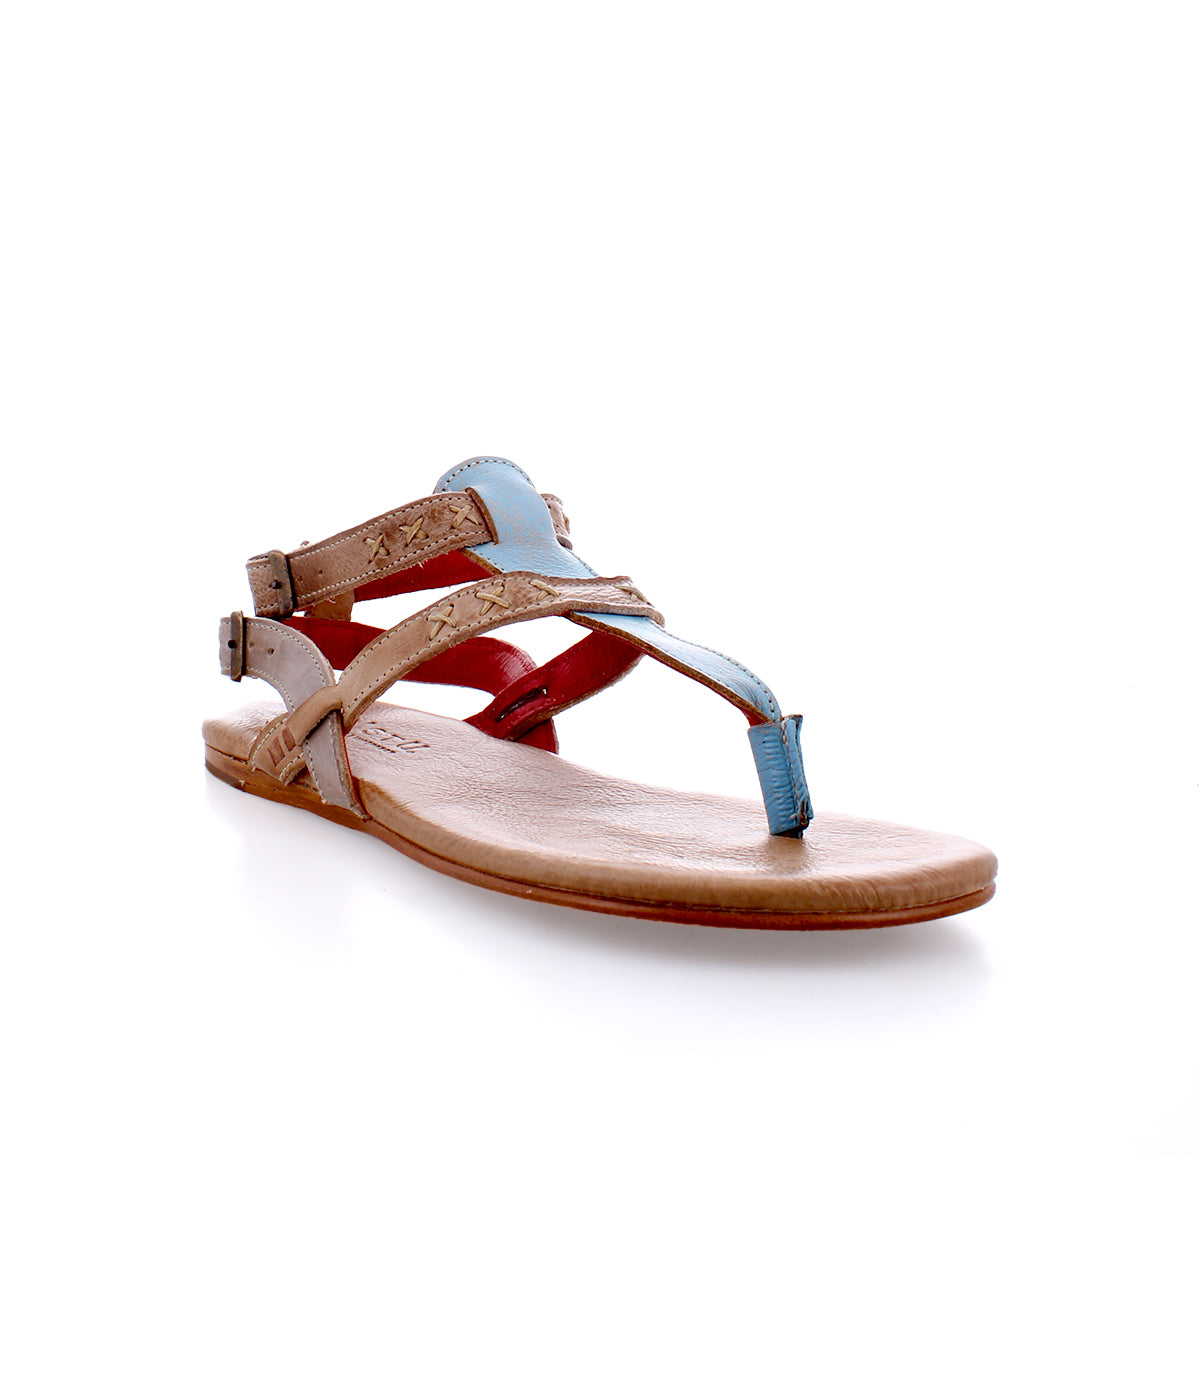 An artisanal craftsmanship strappy sandal, combining comfort with Moon blue and red straps by Bed Stu.